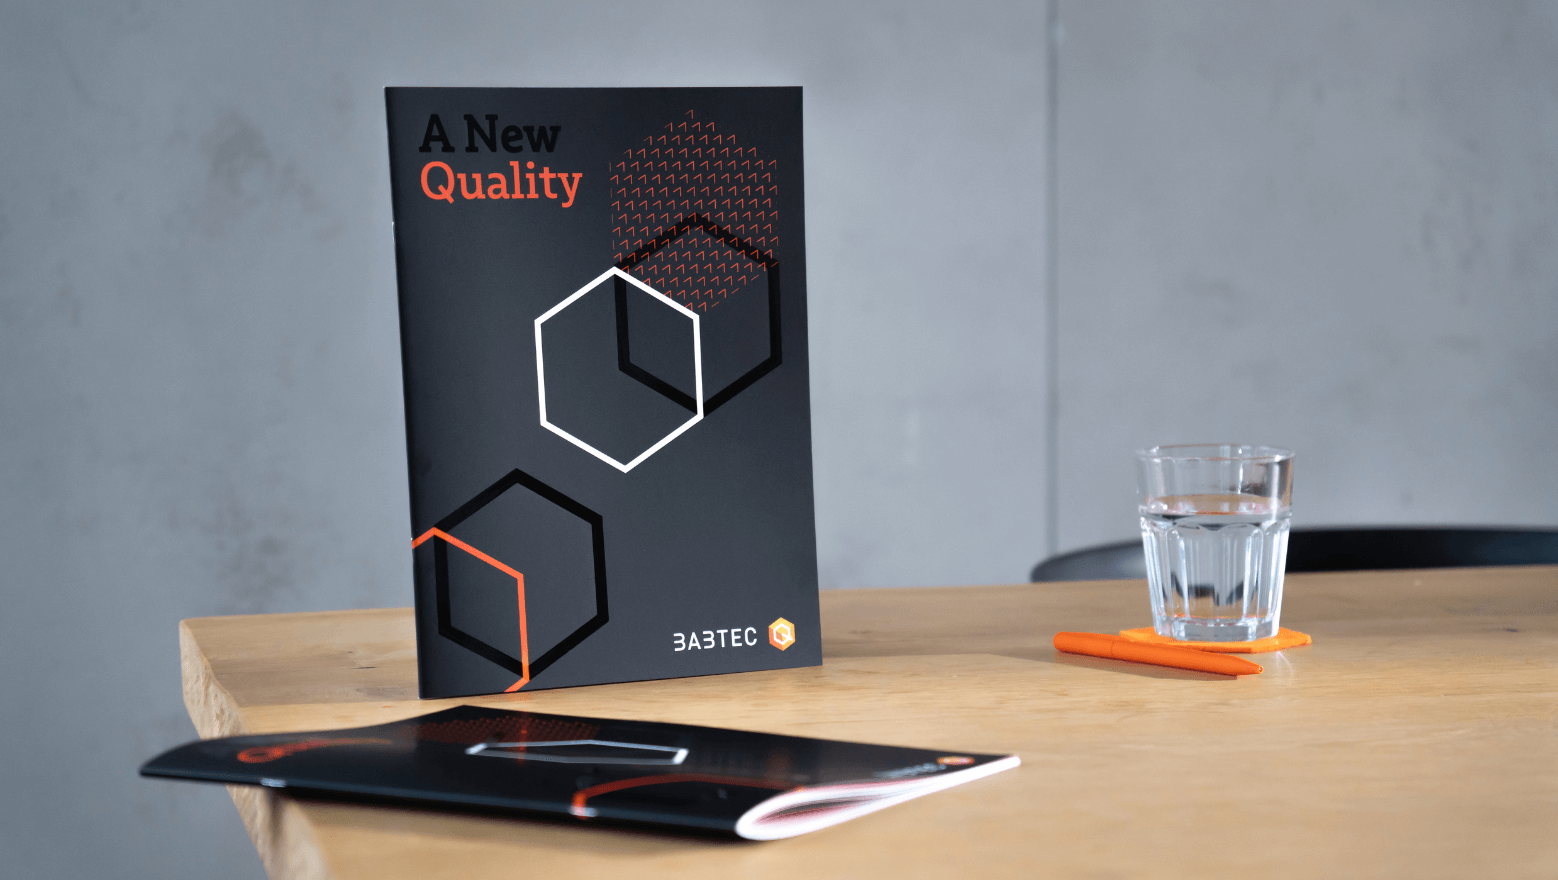 Brochure "A new Quality" on a table